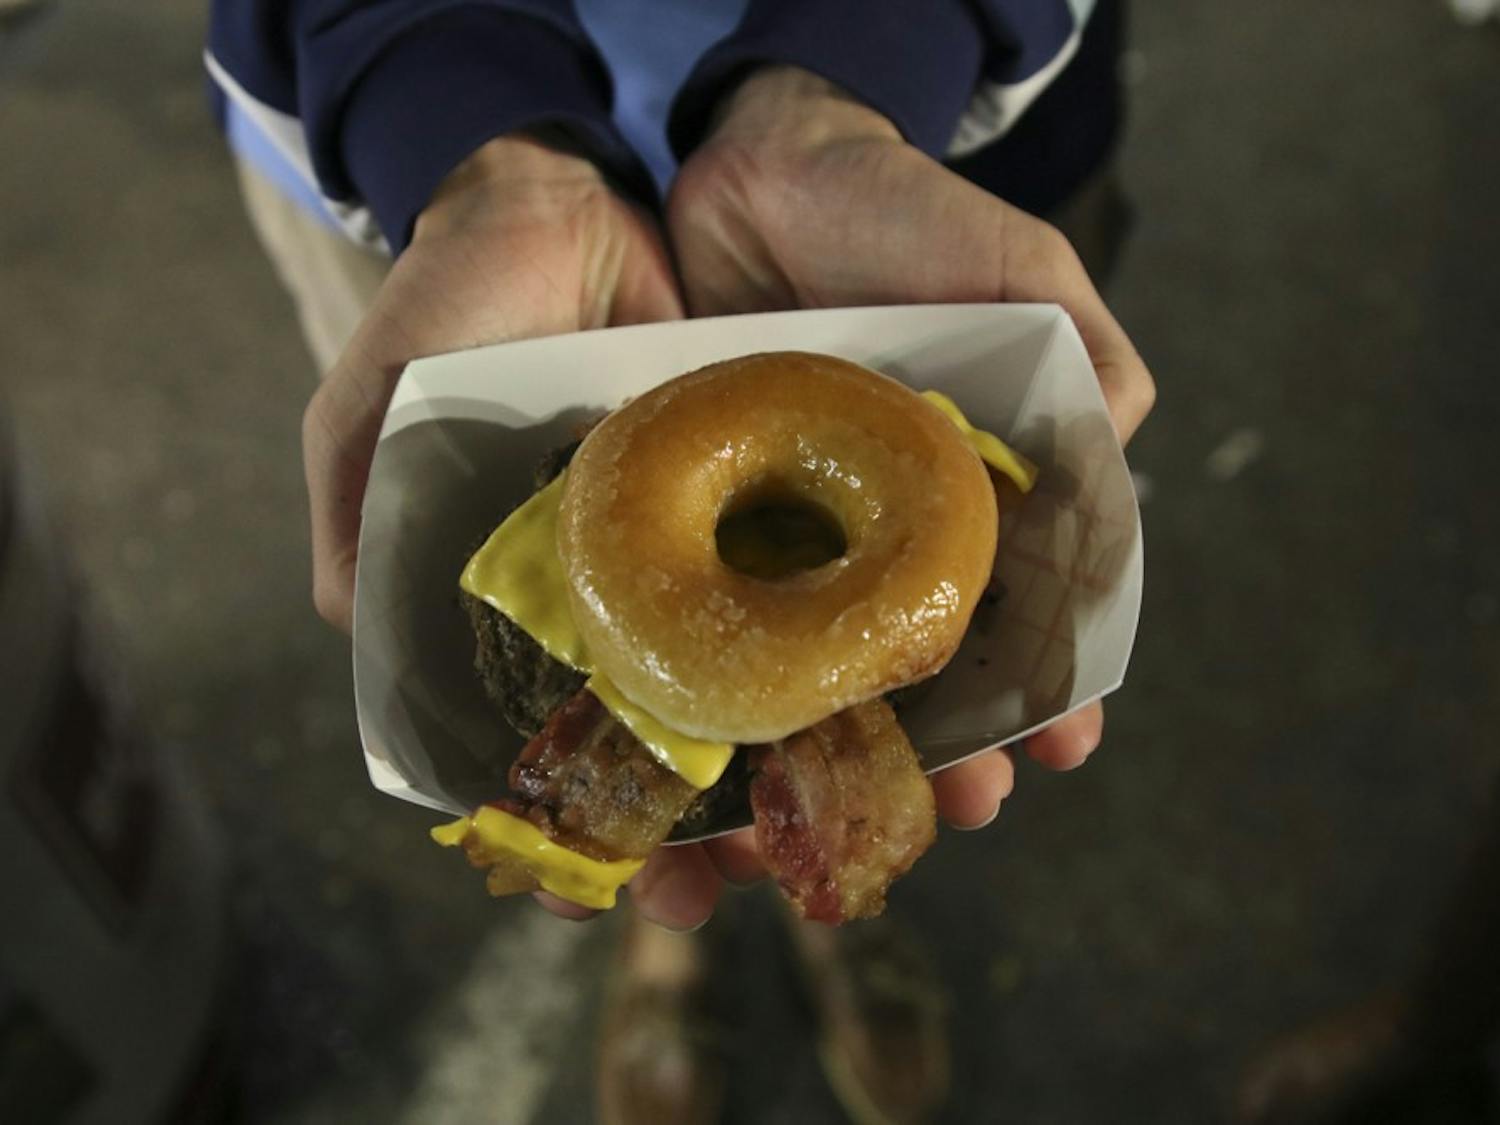 Krispy Kreme burgers are one of many unique foods one can find at the N.C. State Fair.